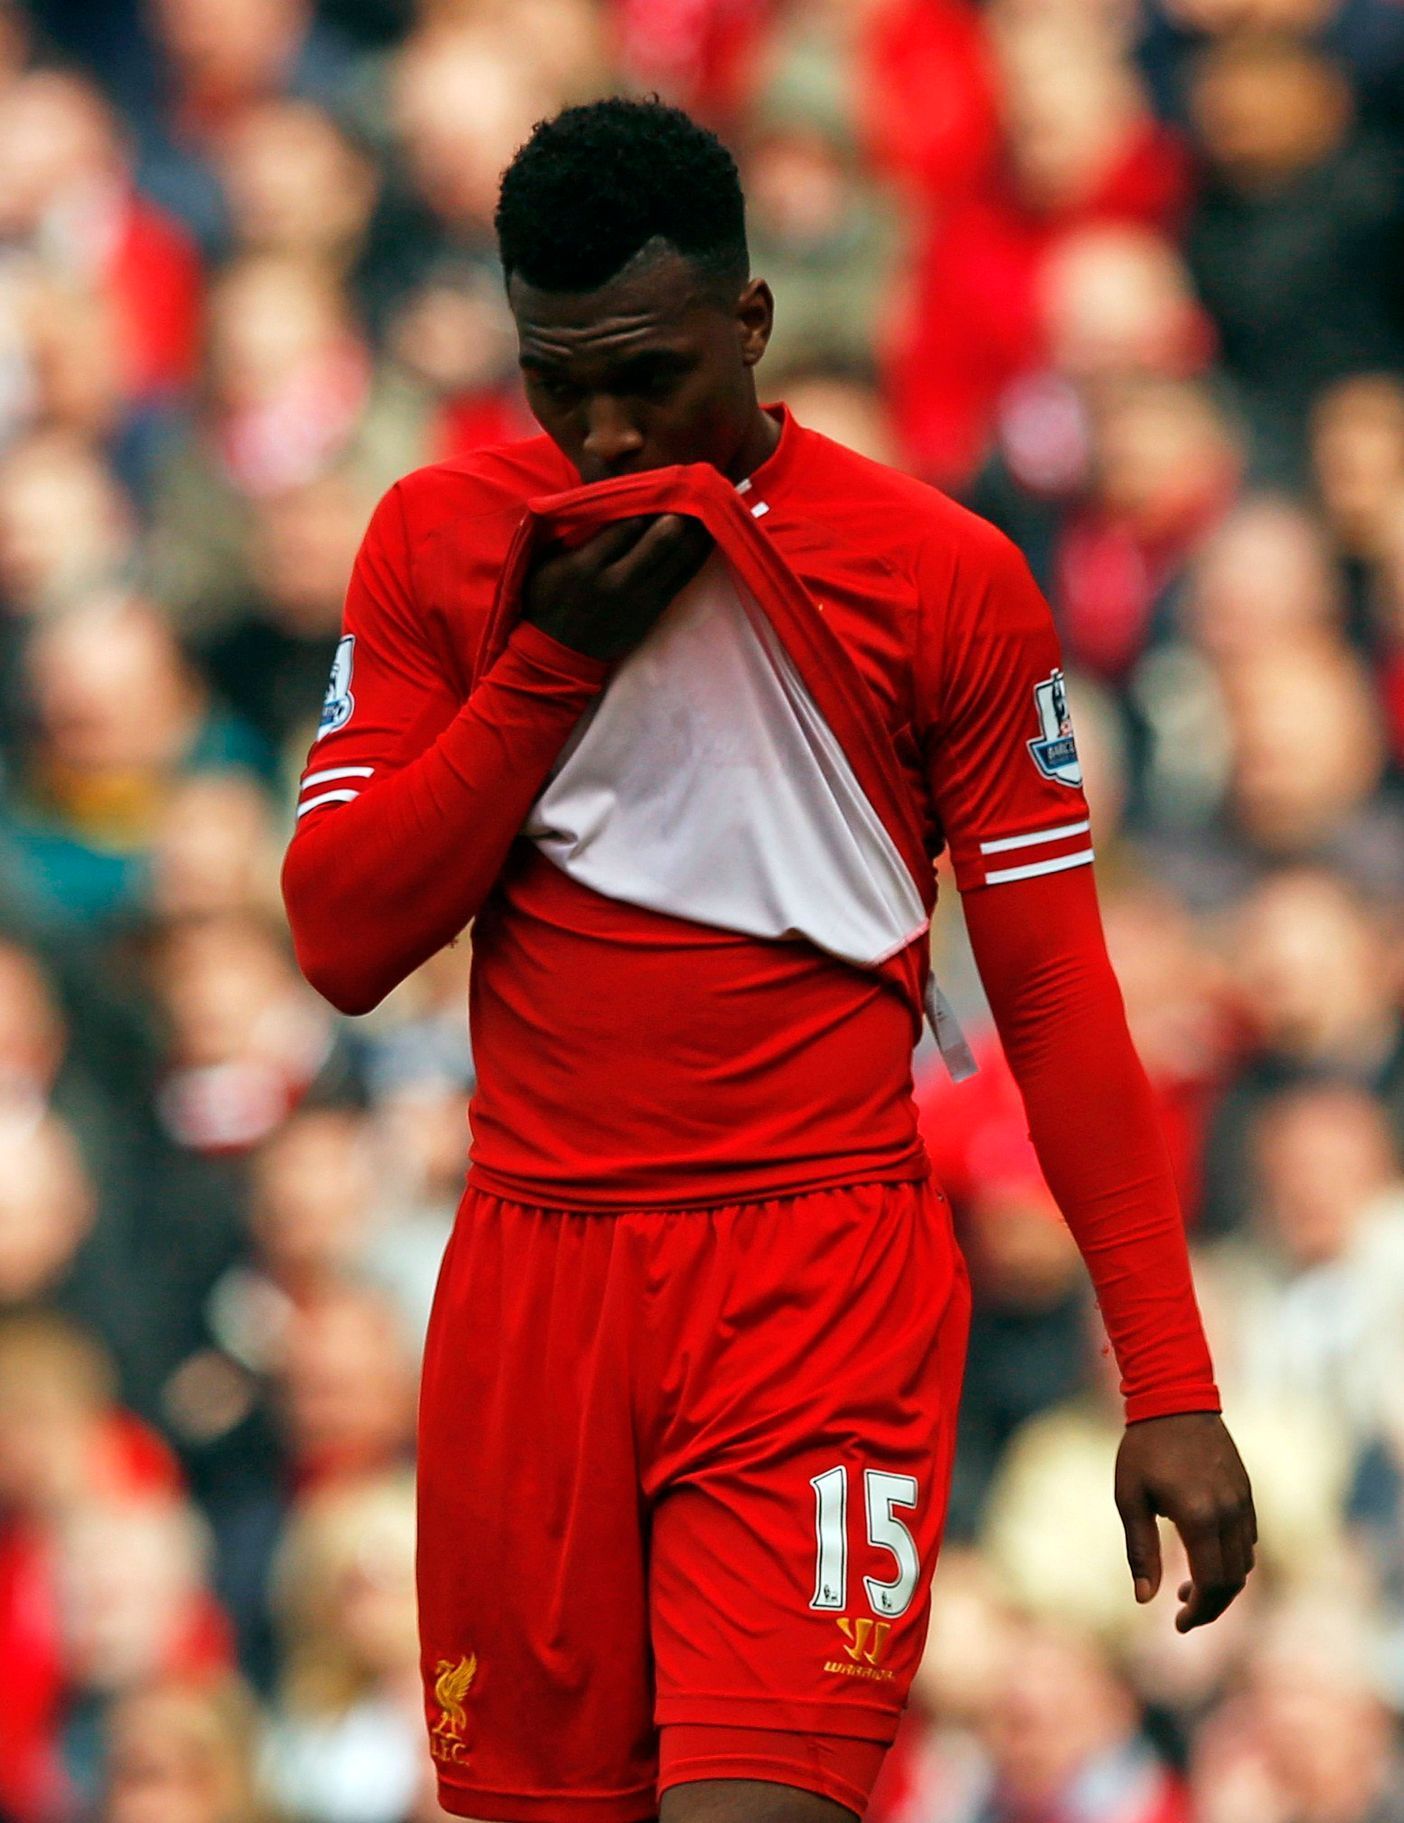 Liverpool's Sturridge reacts during their English Premier League soccer match against Newcastle United in Liverpool